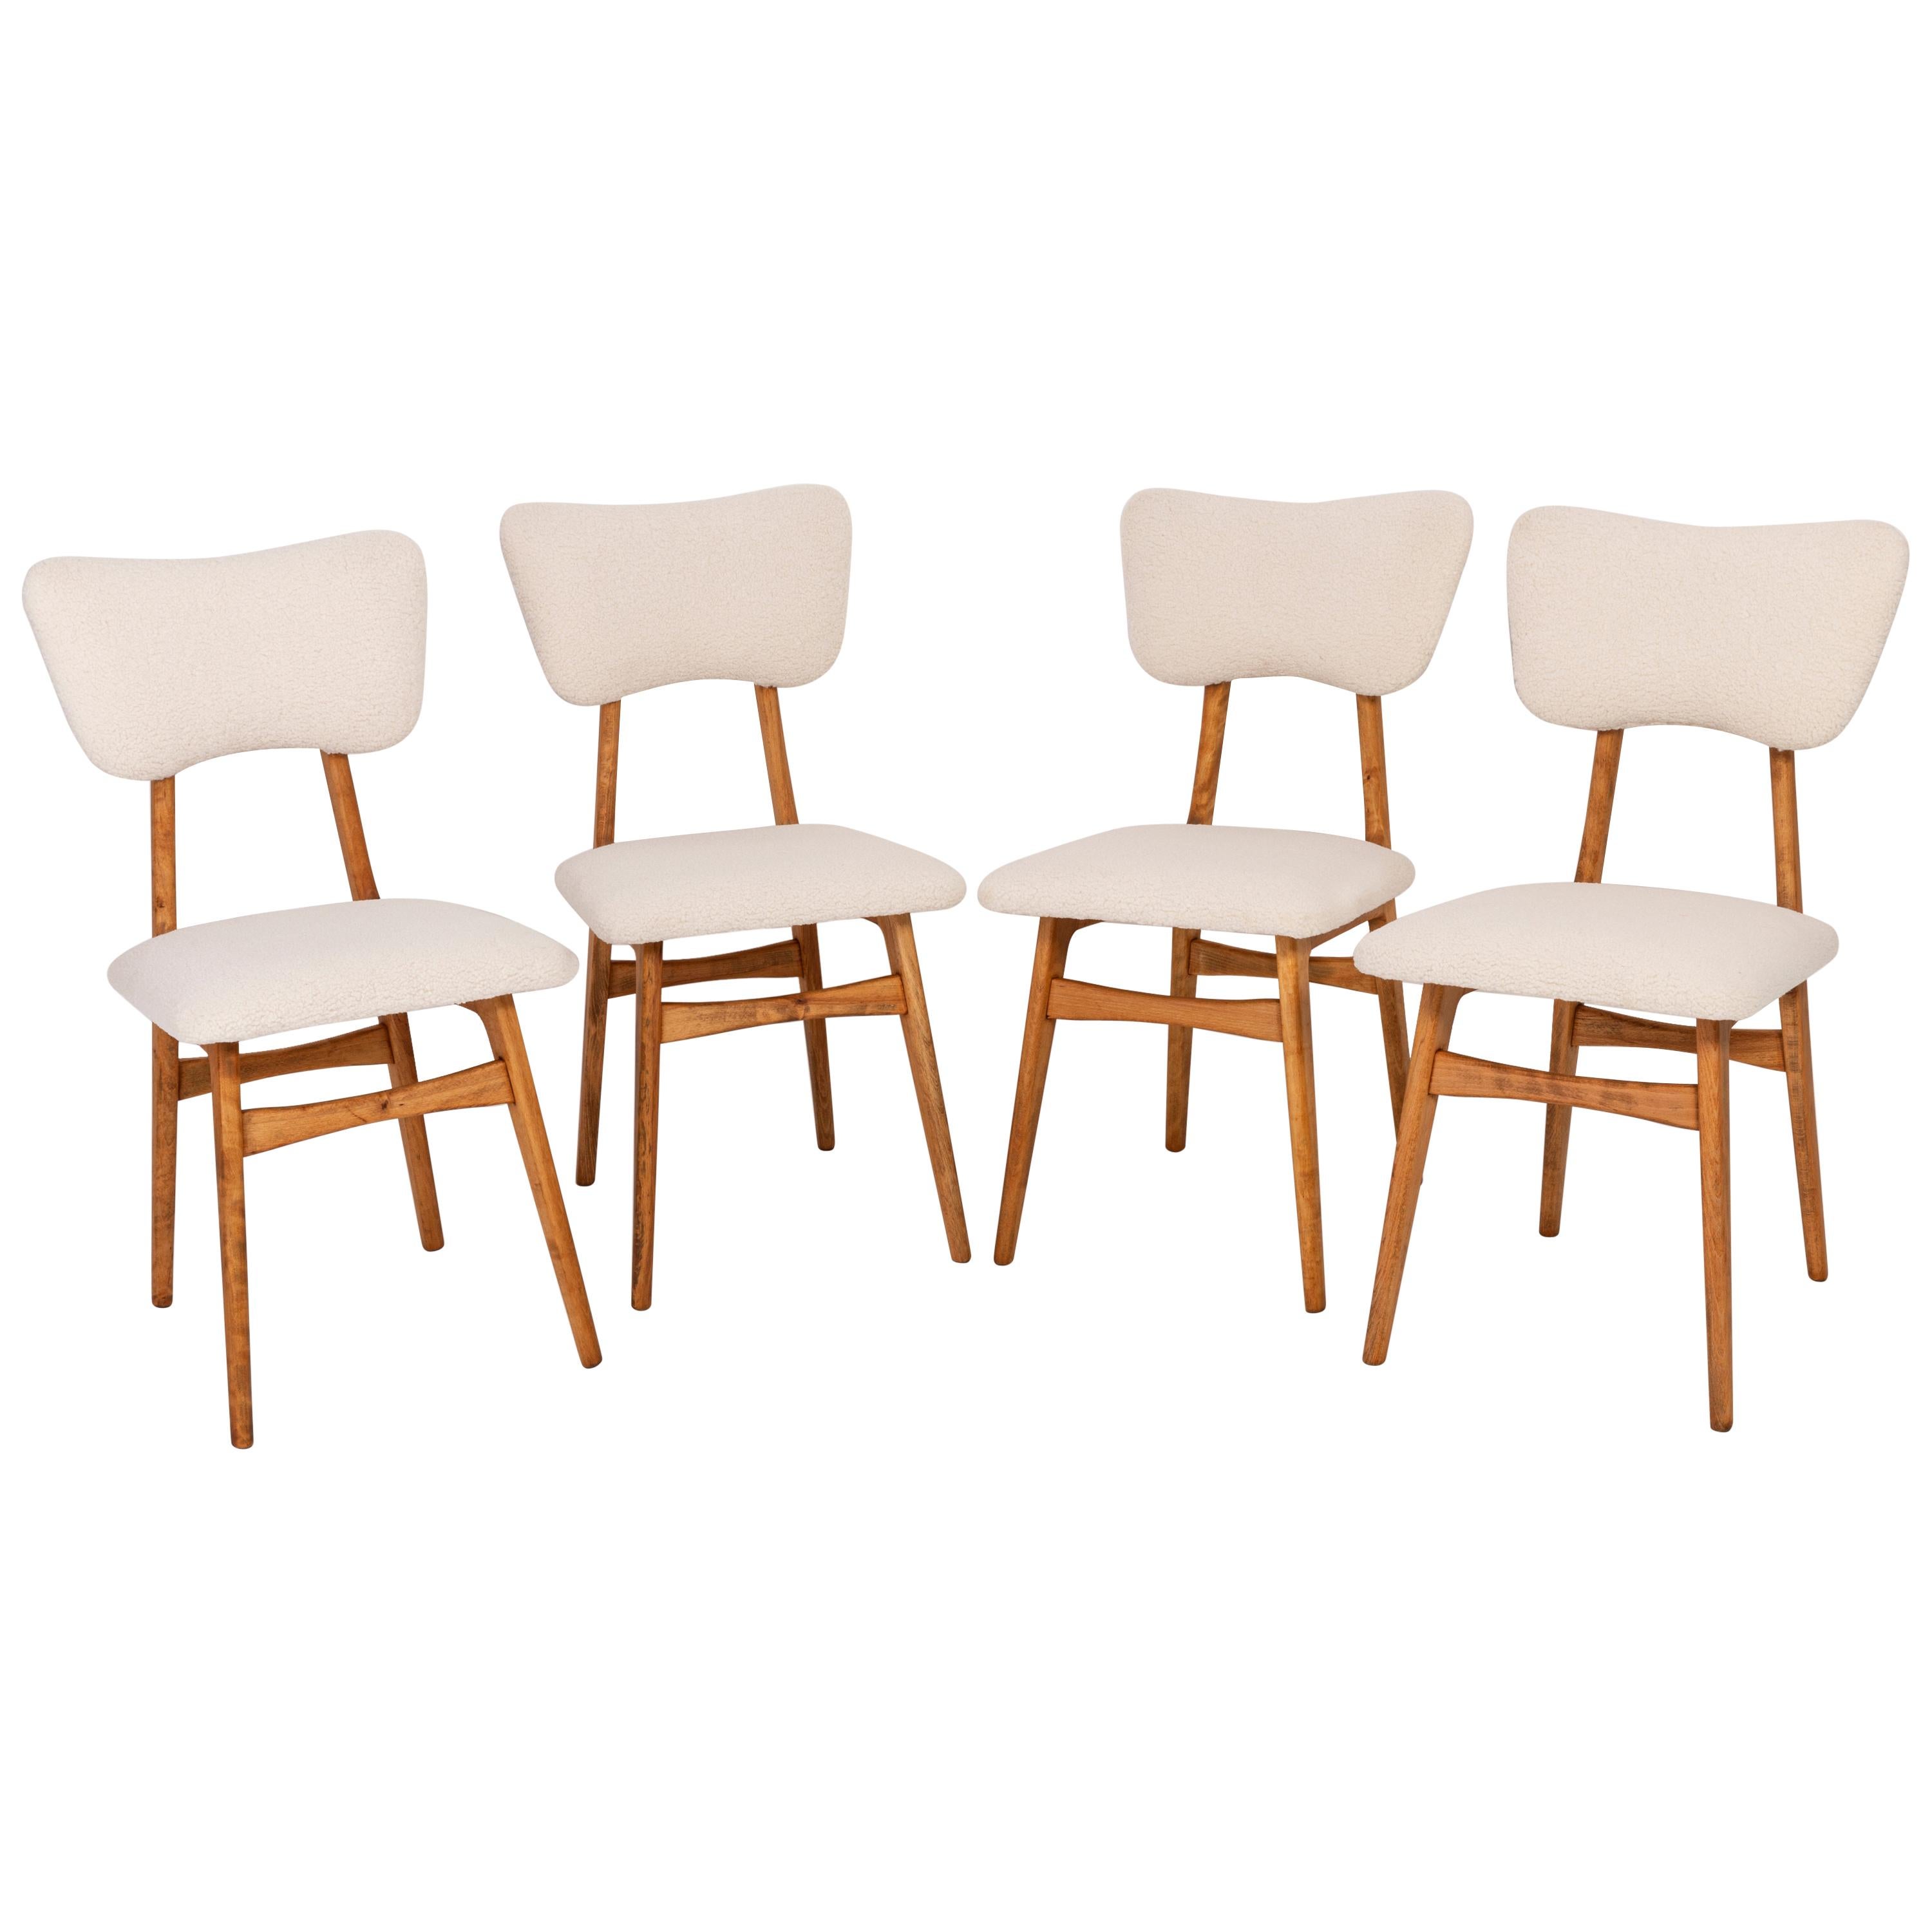 Set of Four 20th Century Light Crème Boucle Chairs, 1960s